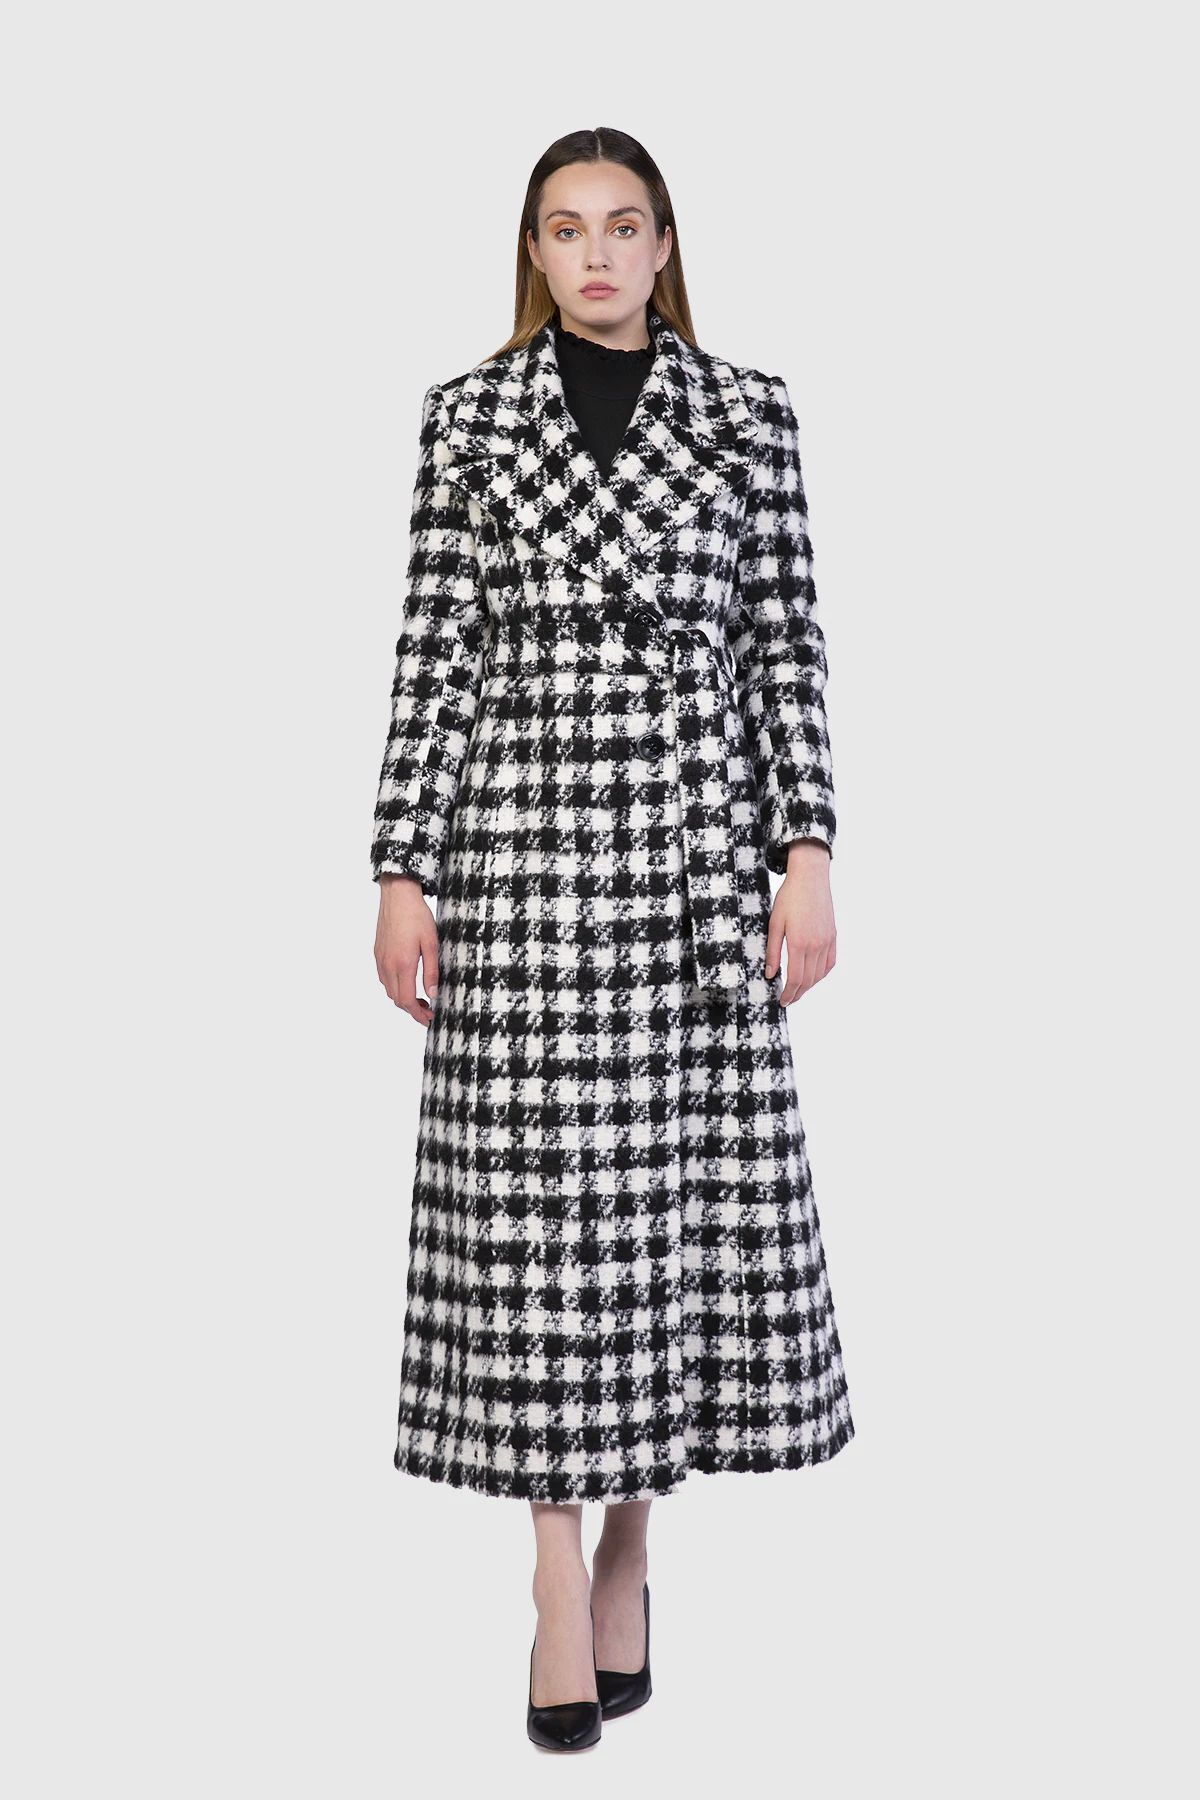  GIZIA - Crowbar Plaid Patterned Belted Black And White Coat